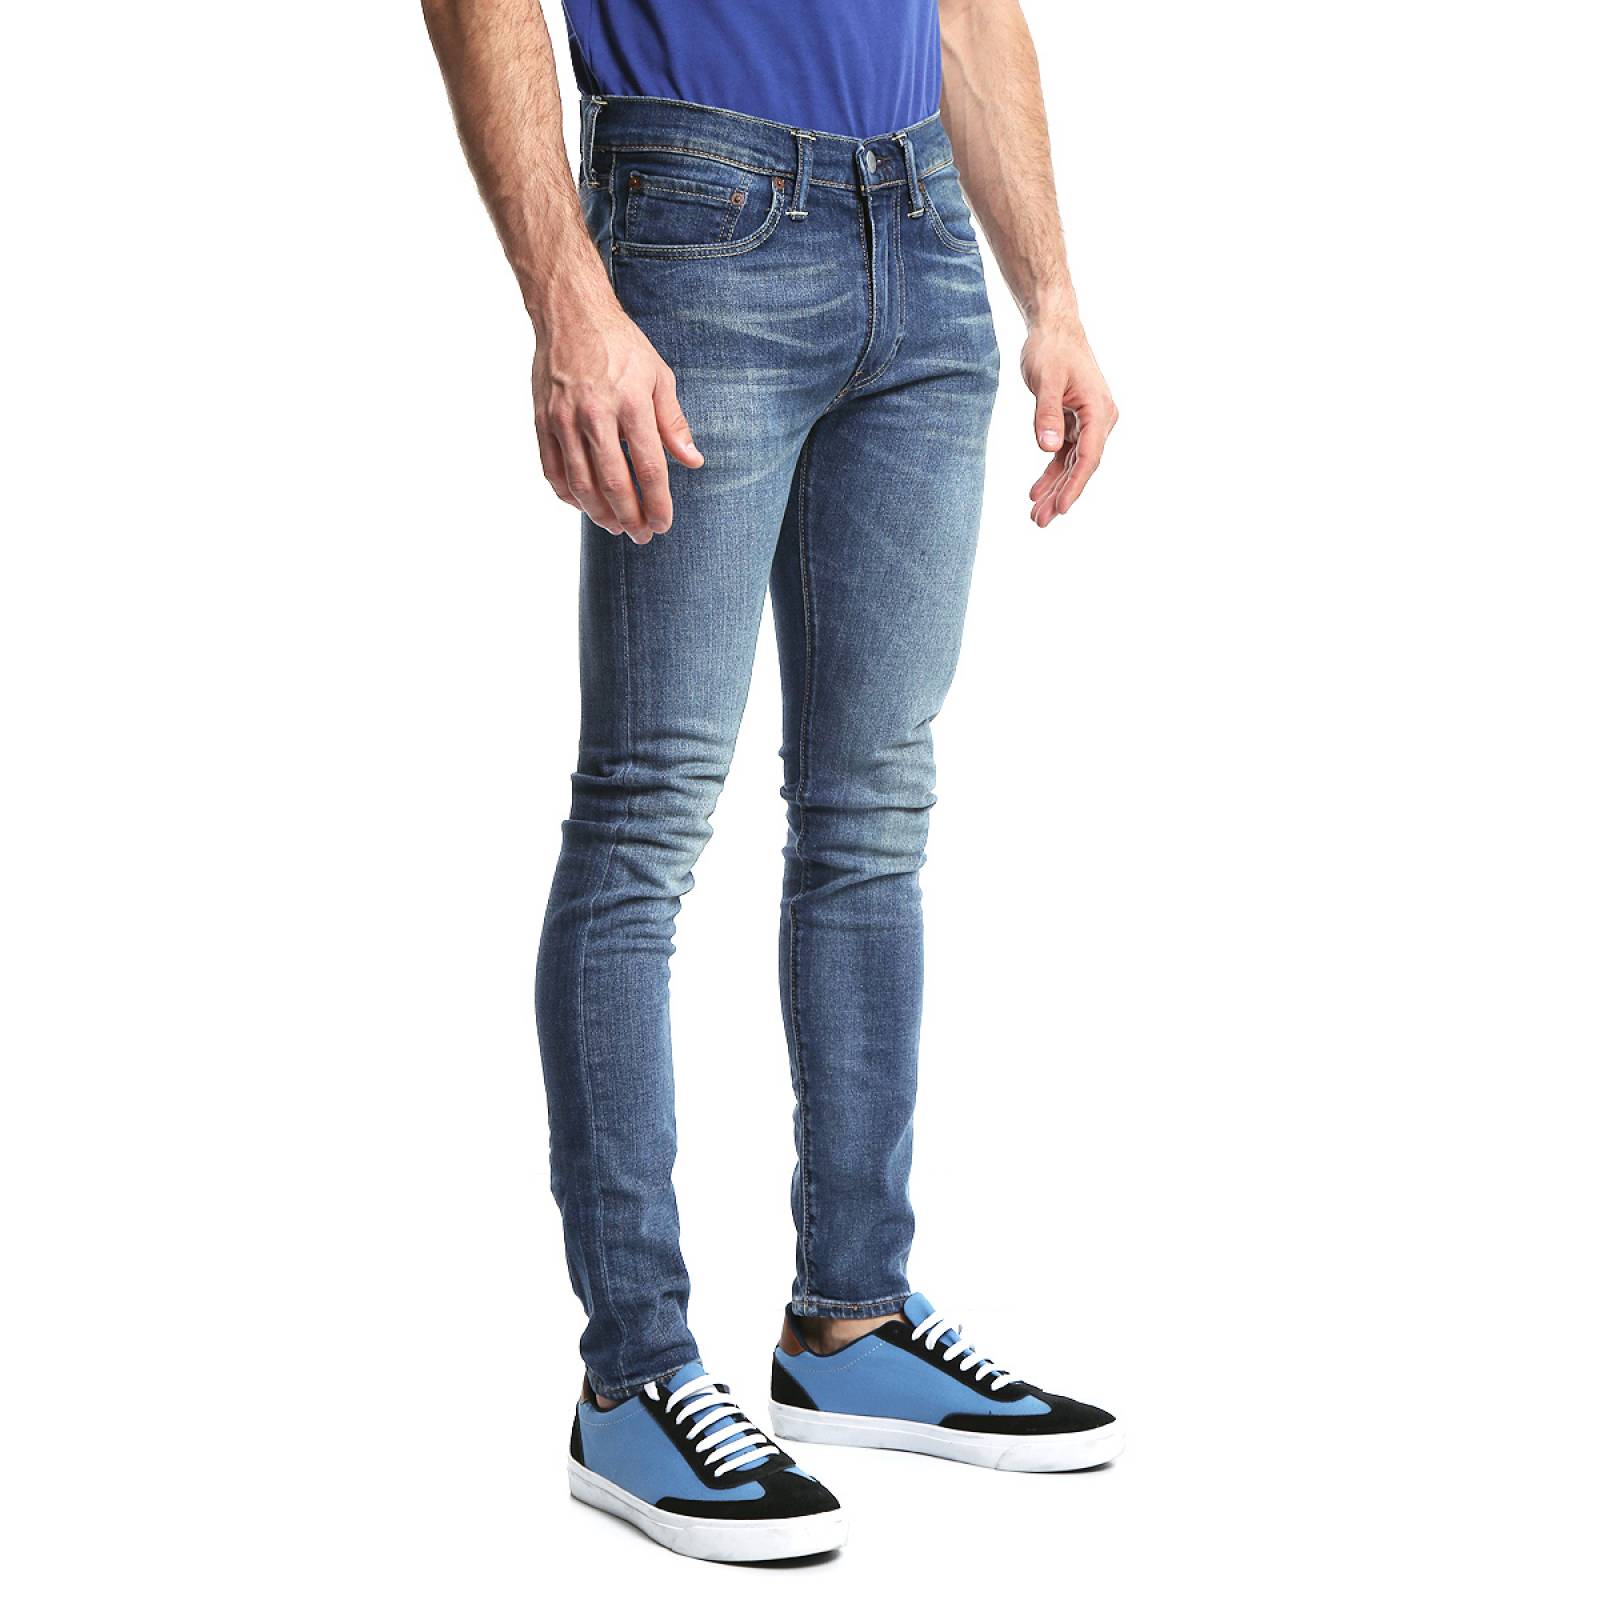 Jeans 519 Extreme Skinny Fit Wilderne para Caballero